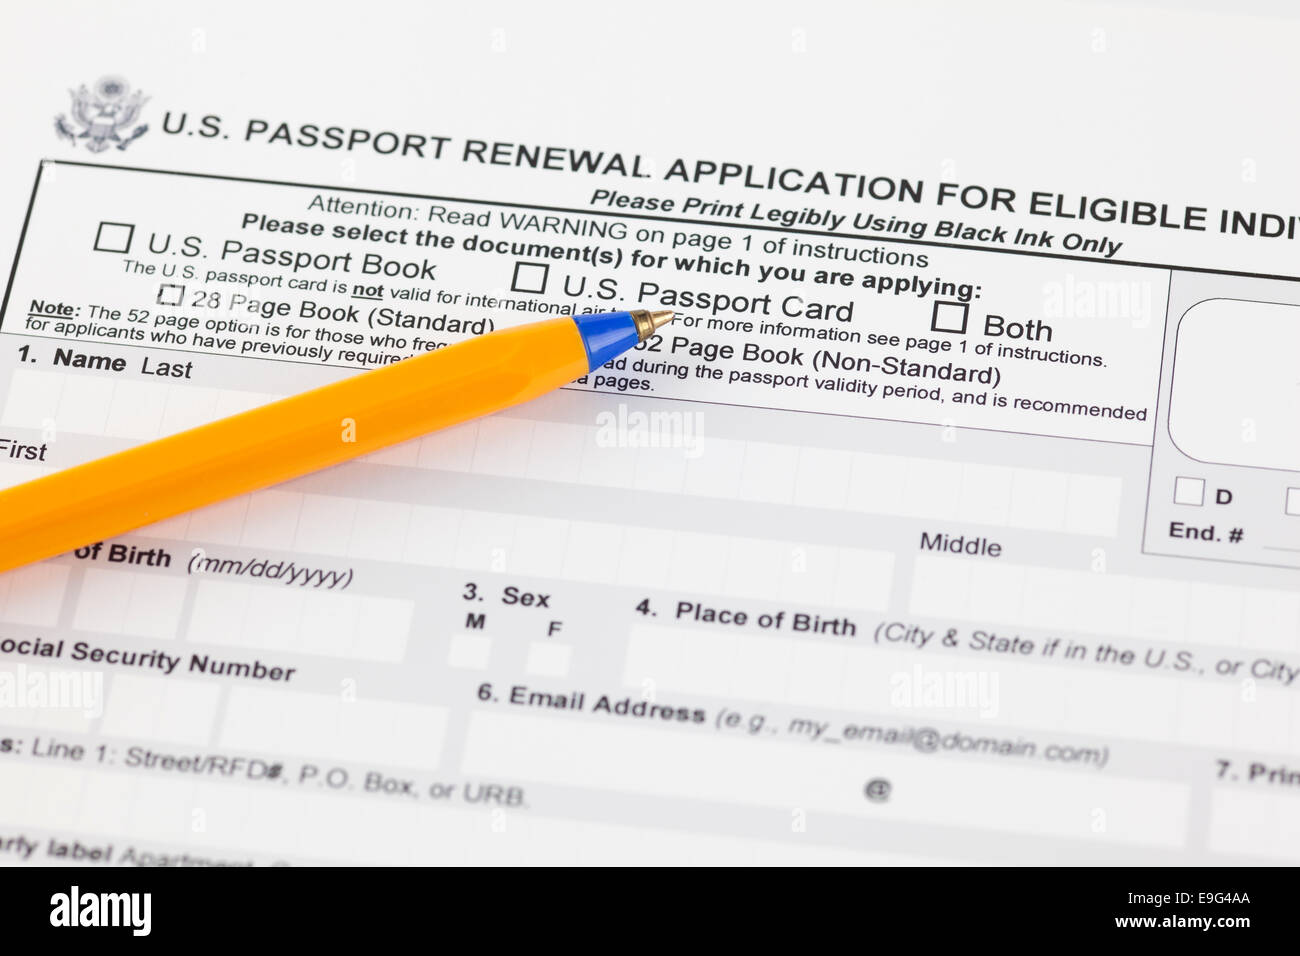 U.S. passport renewal application for eligible individuals with ballpoint pen. Stock Photo